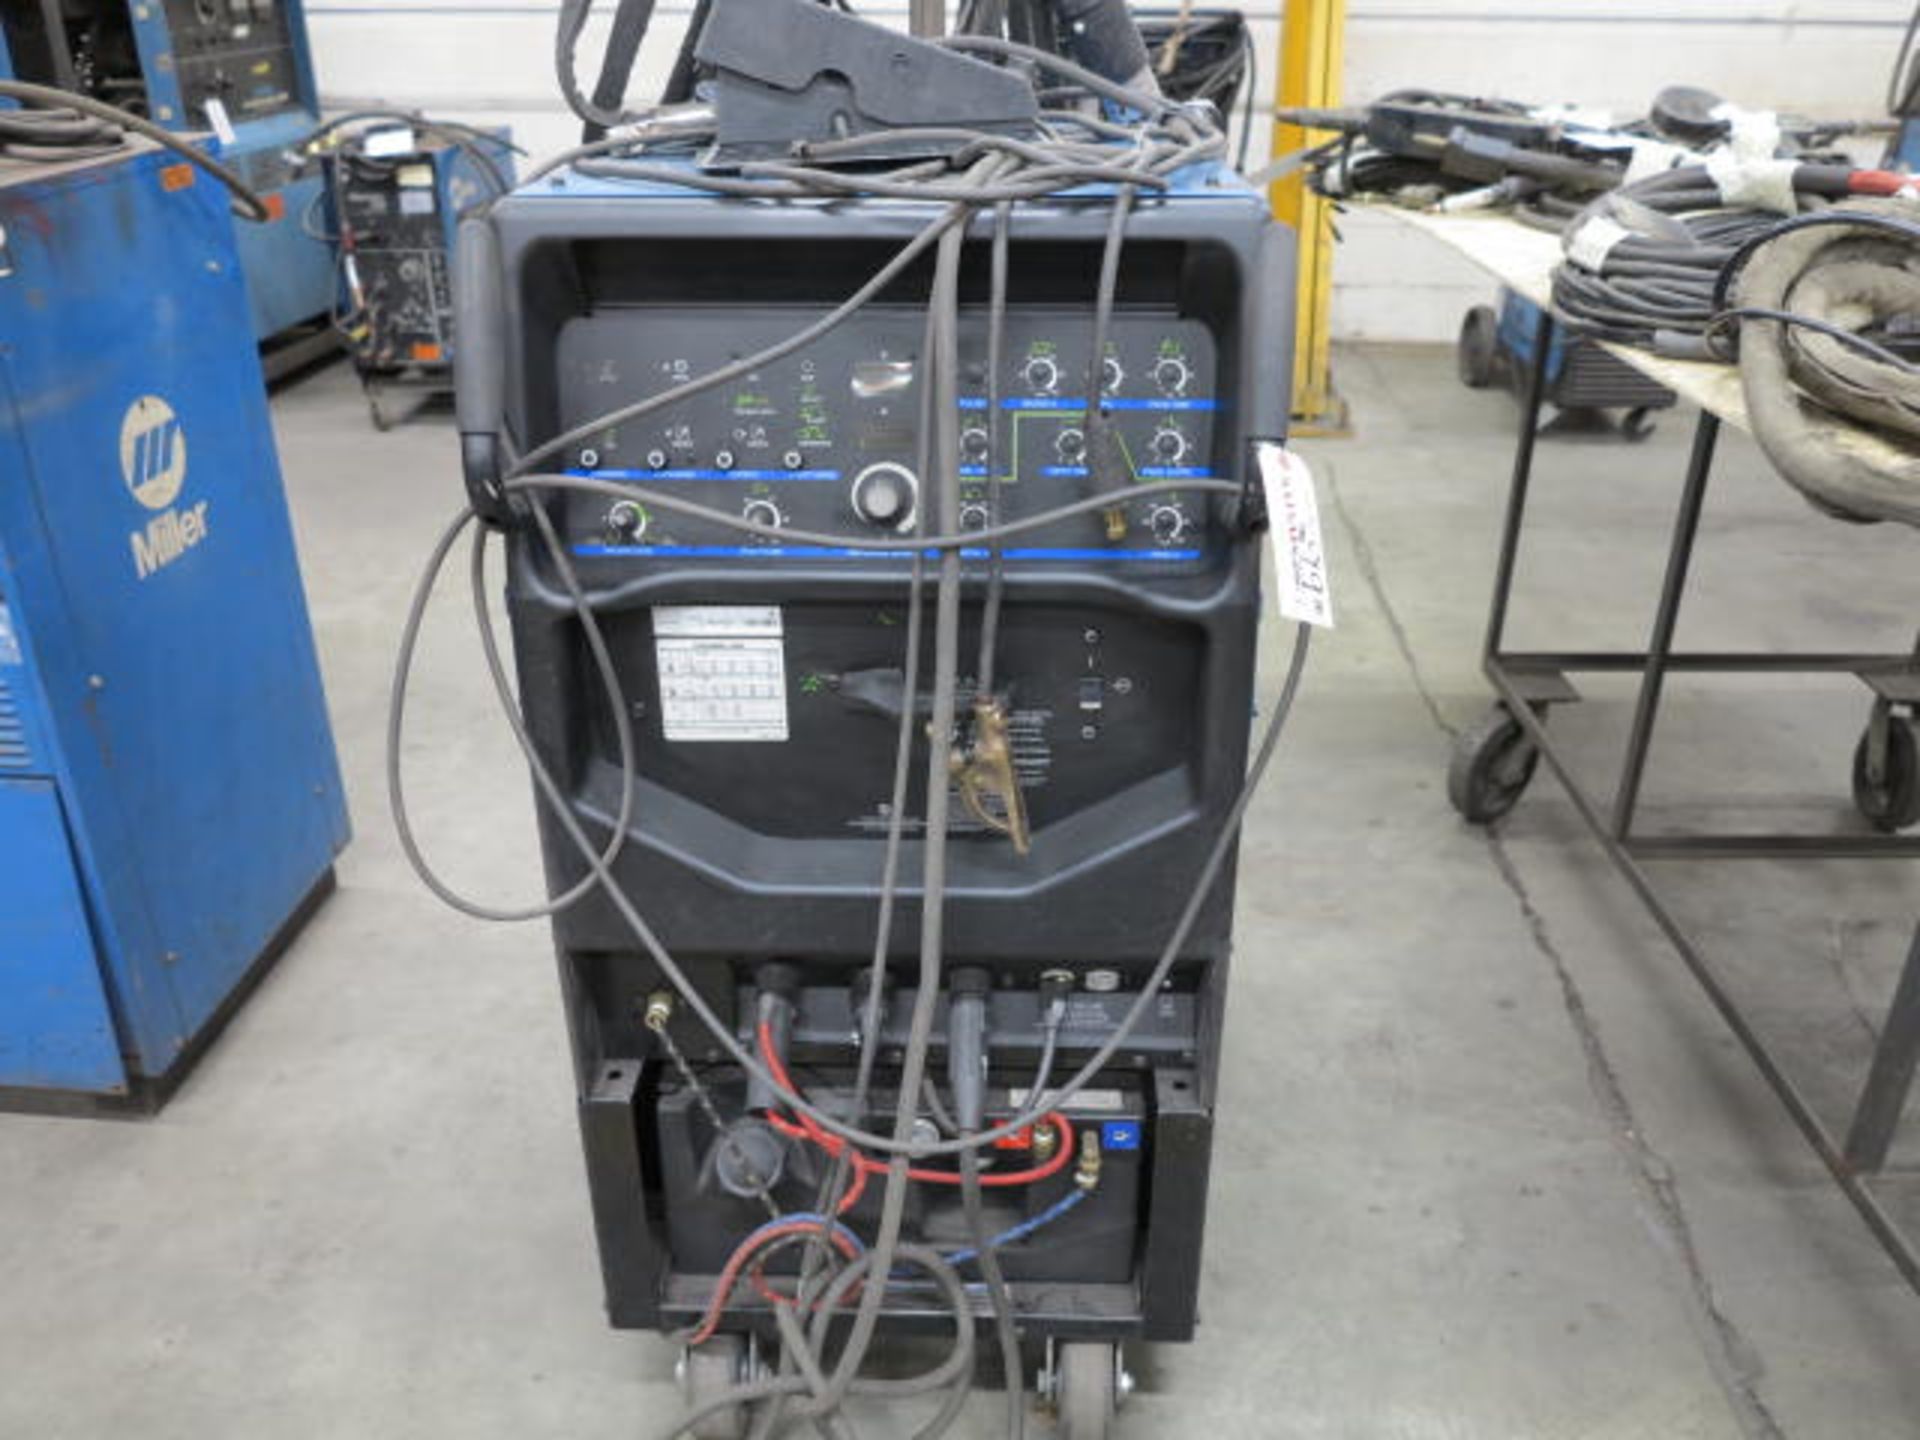 Miller Synchrowave 2500X TIG Welder S/N MH37043L with Foot Pedal, Grounding Lead, TIG Gun and - Image 2 of 2